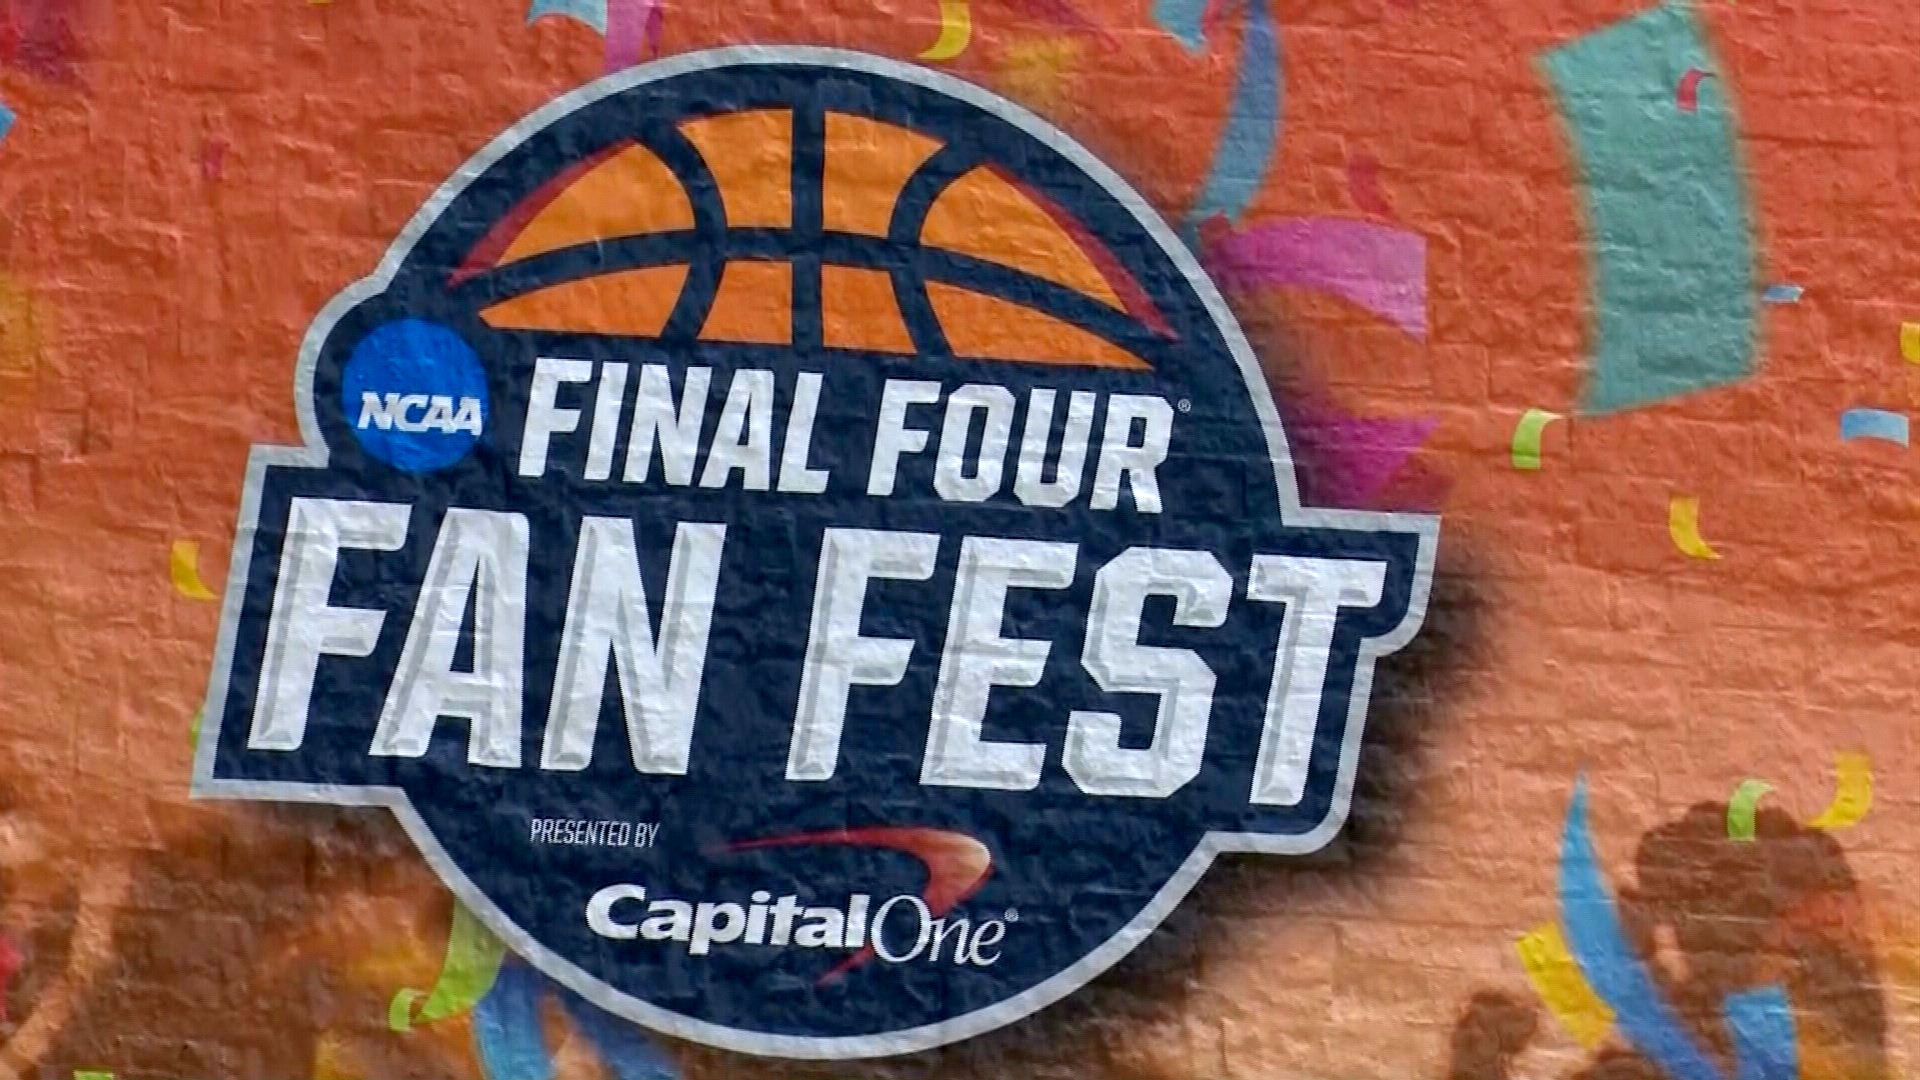 Plan ahead if you're attending Final Four weekend downtown